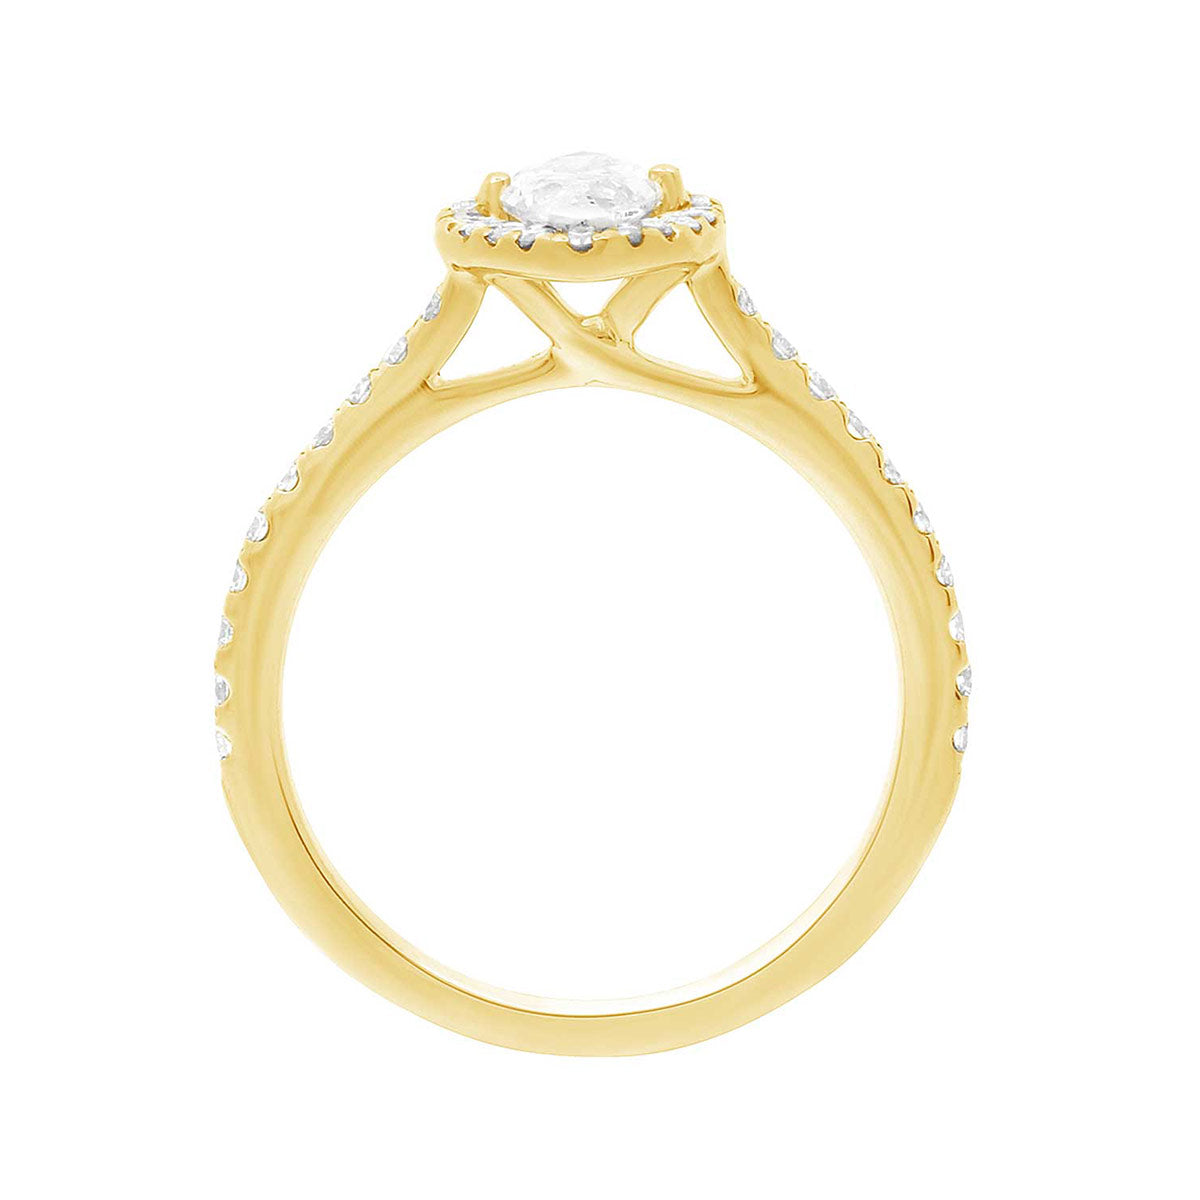 Marquise Halo Engagement Ring in yellow gold inn an upright position